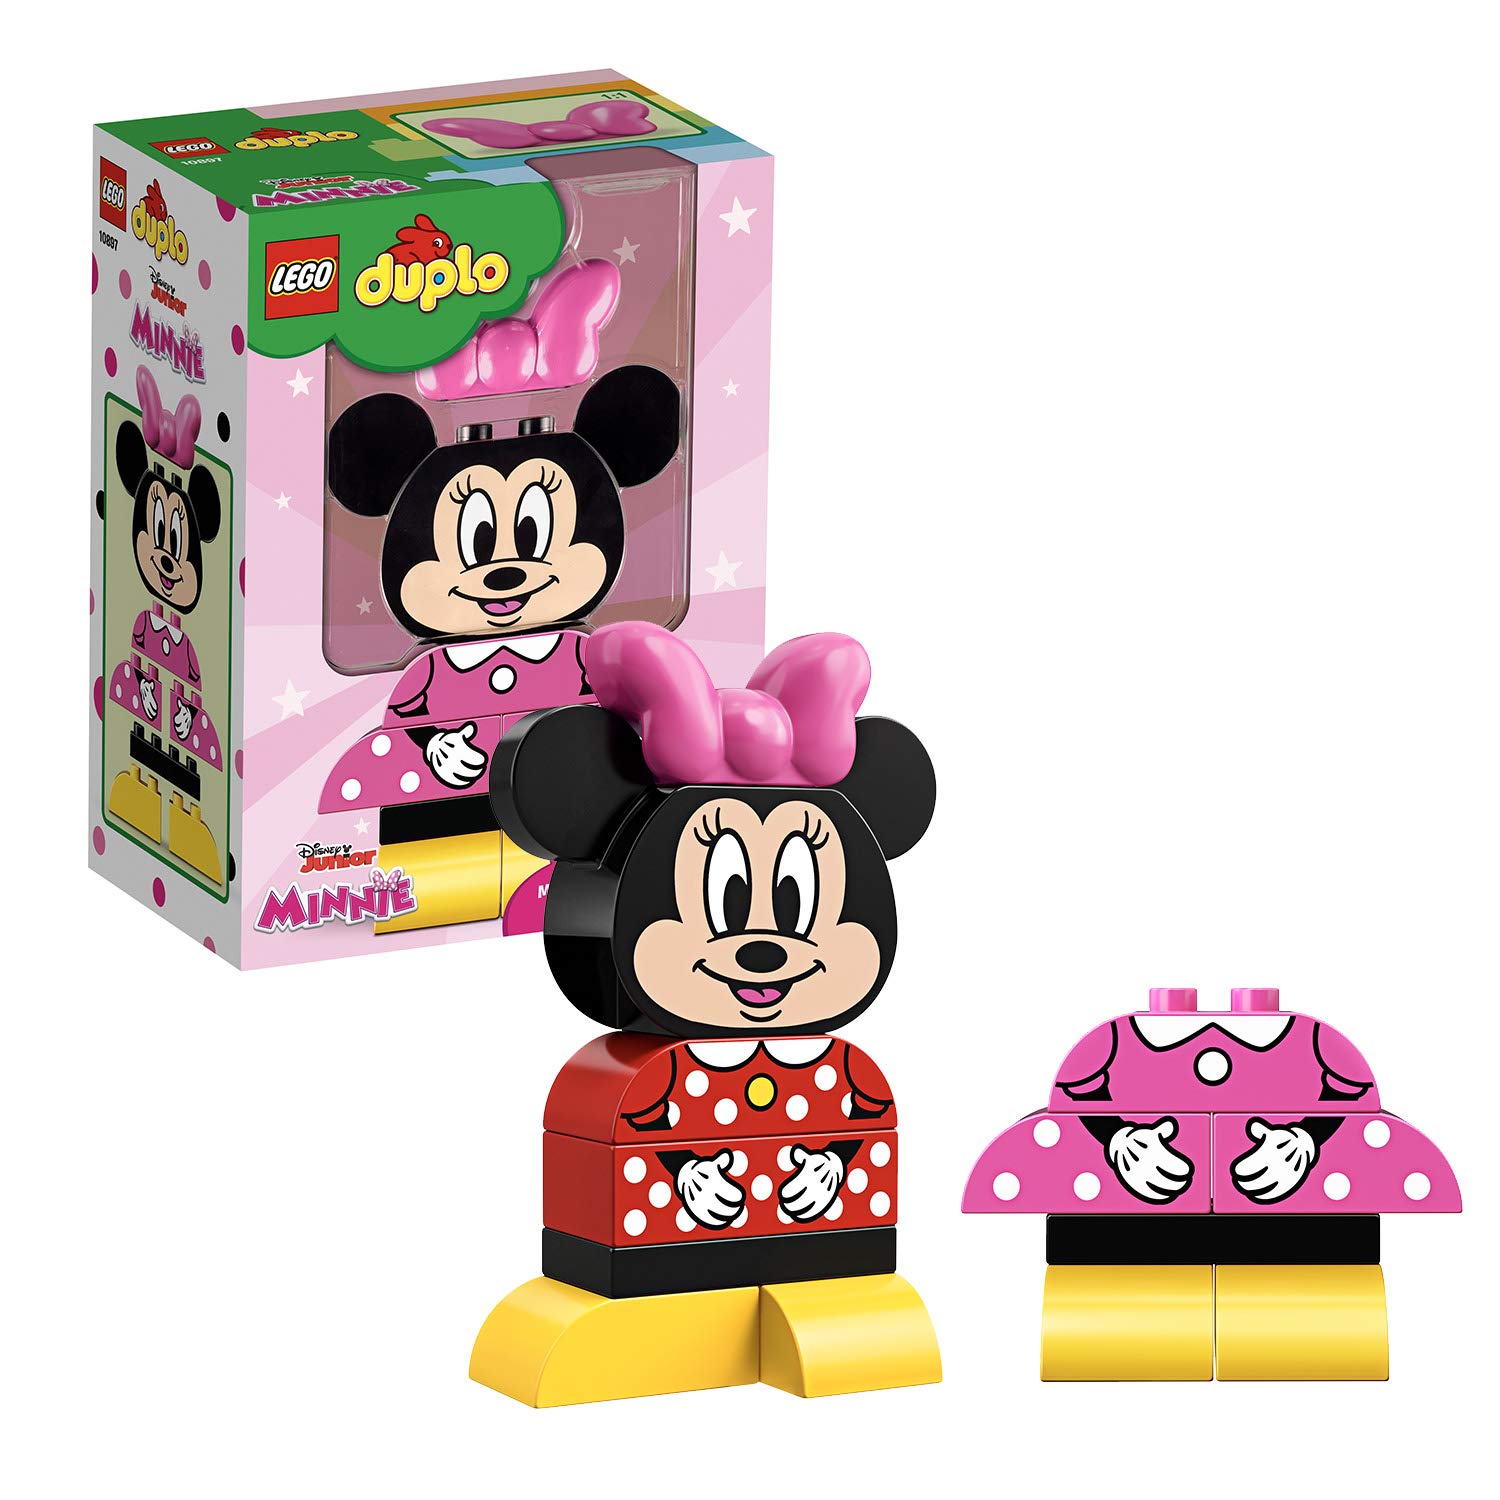 Lego Duplo 10897 - My First Minnie Mouse